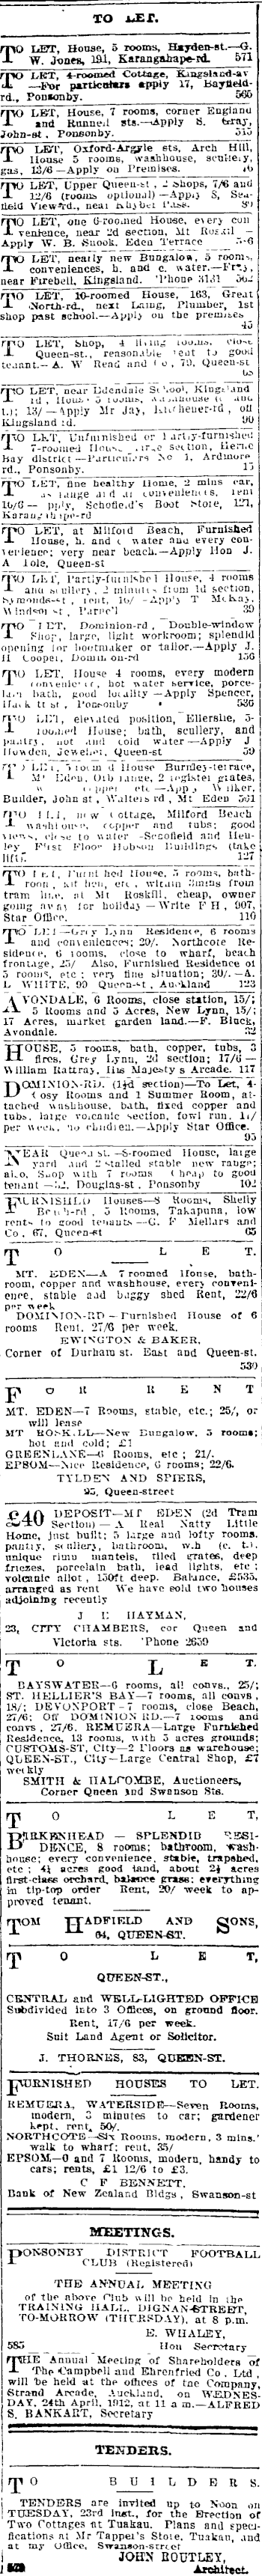 Papers Past Newspapers Auckland Star 17 April 1912 Page 3 Advertisements Column 3